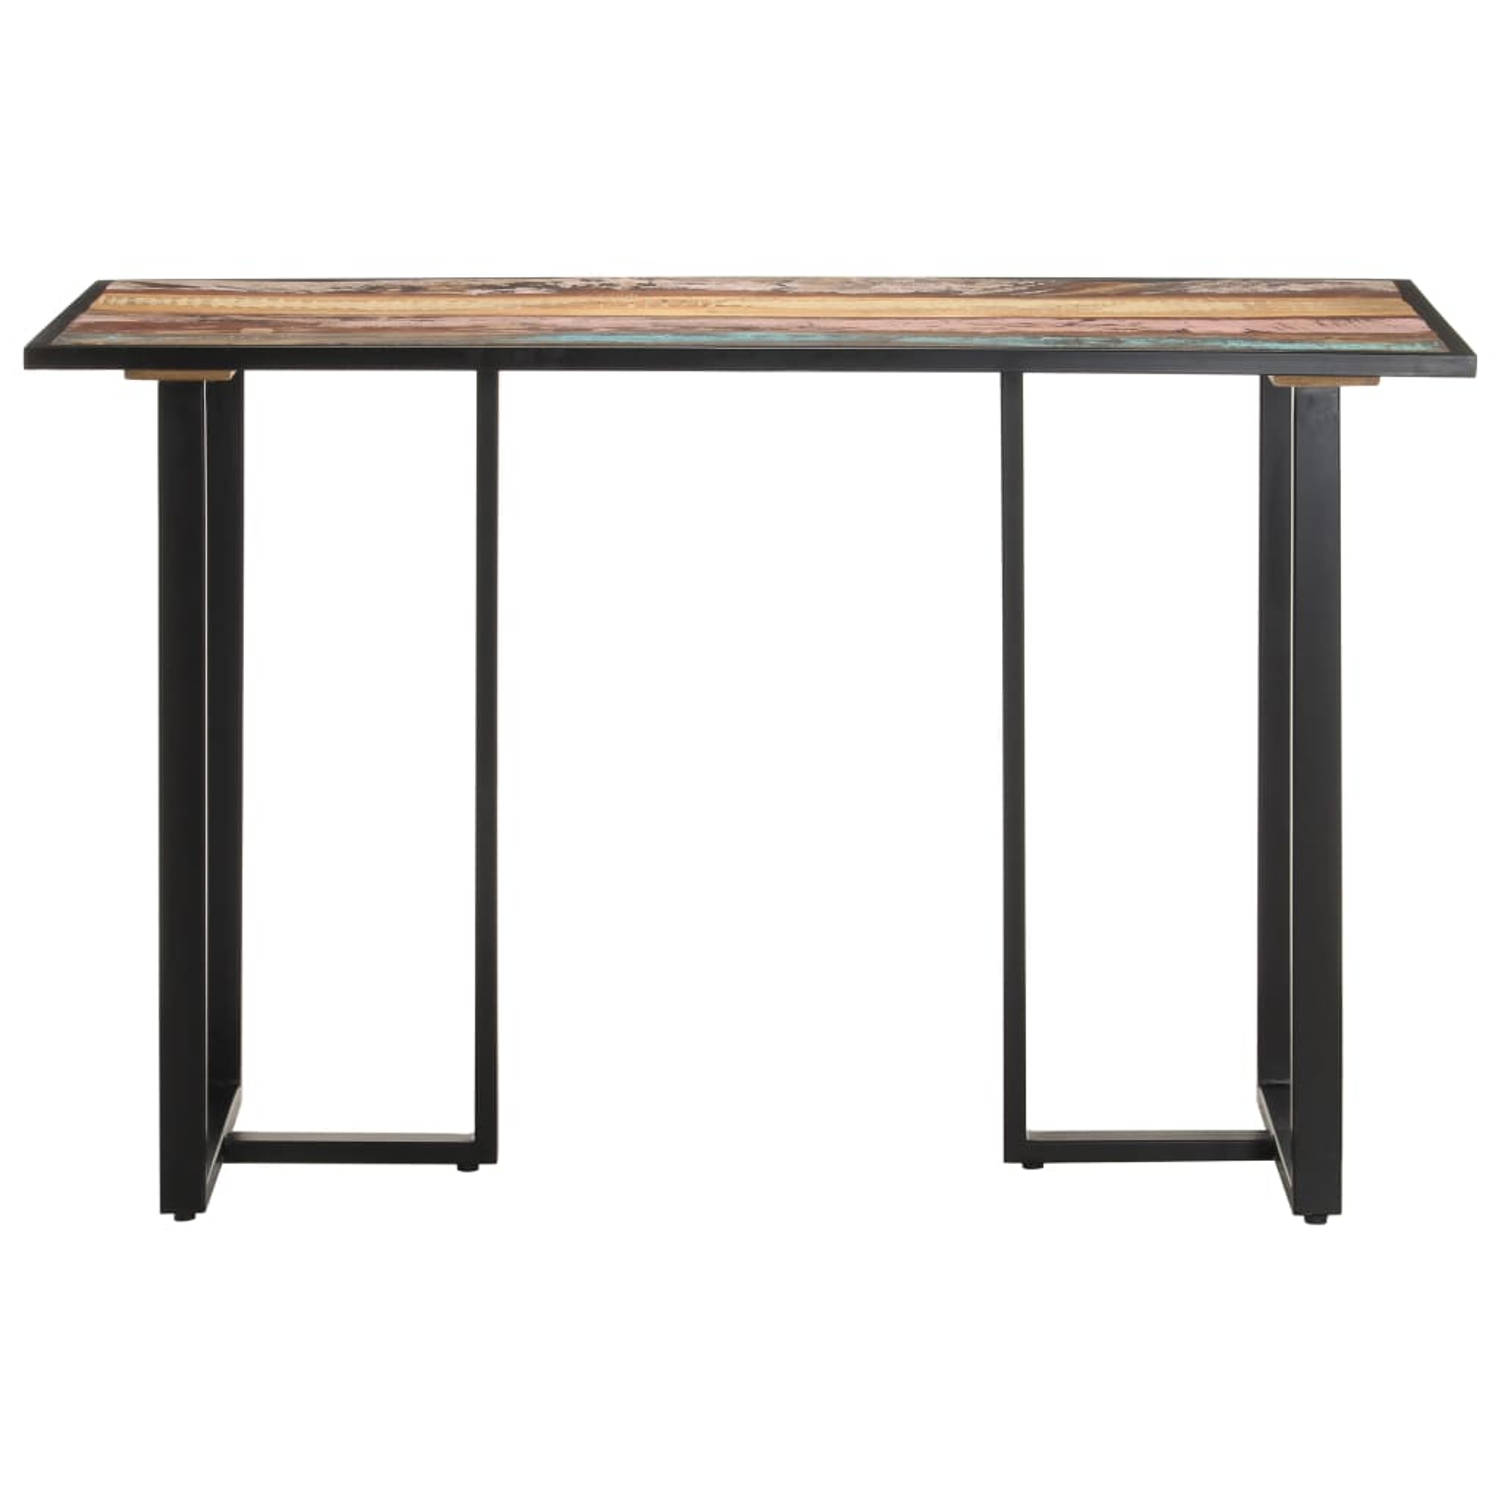 The Living Store Eettafel 120 cm massief gerecycled hout - Tafel